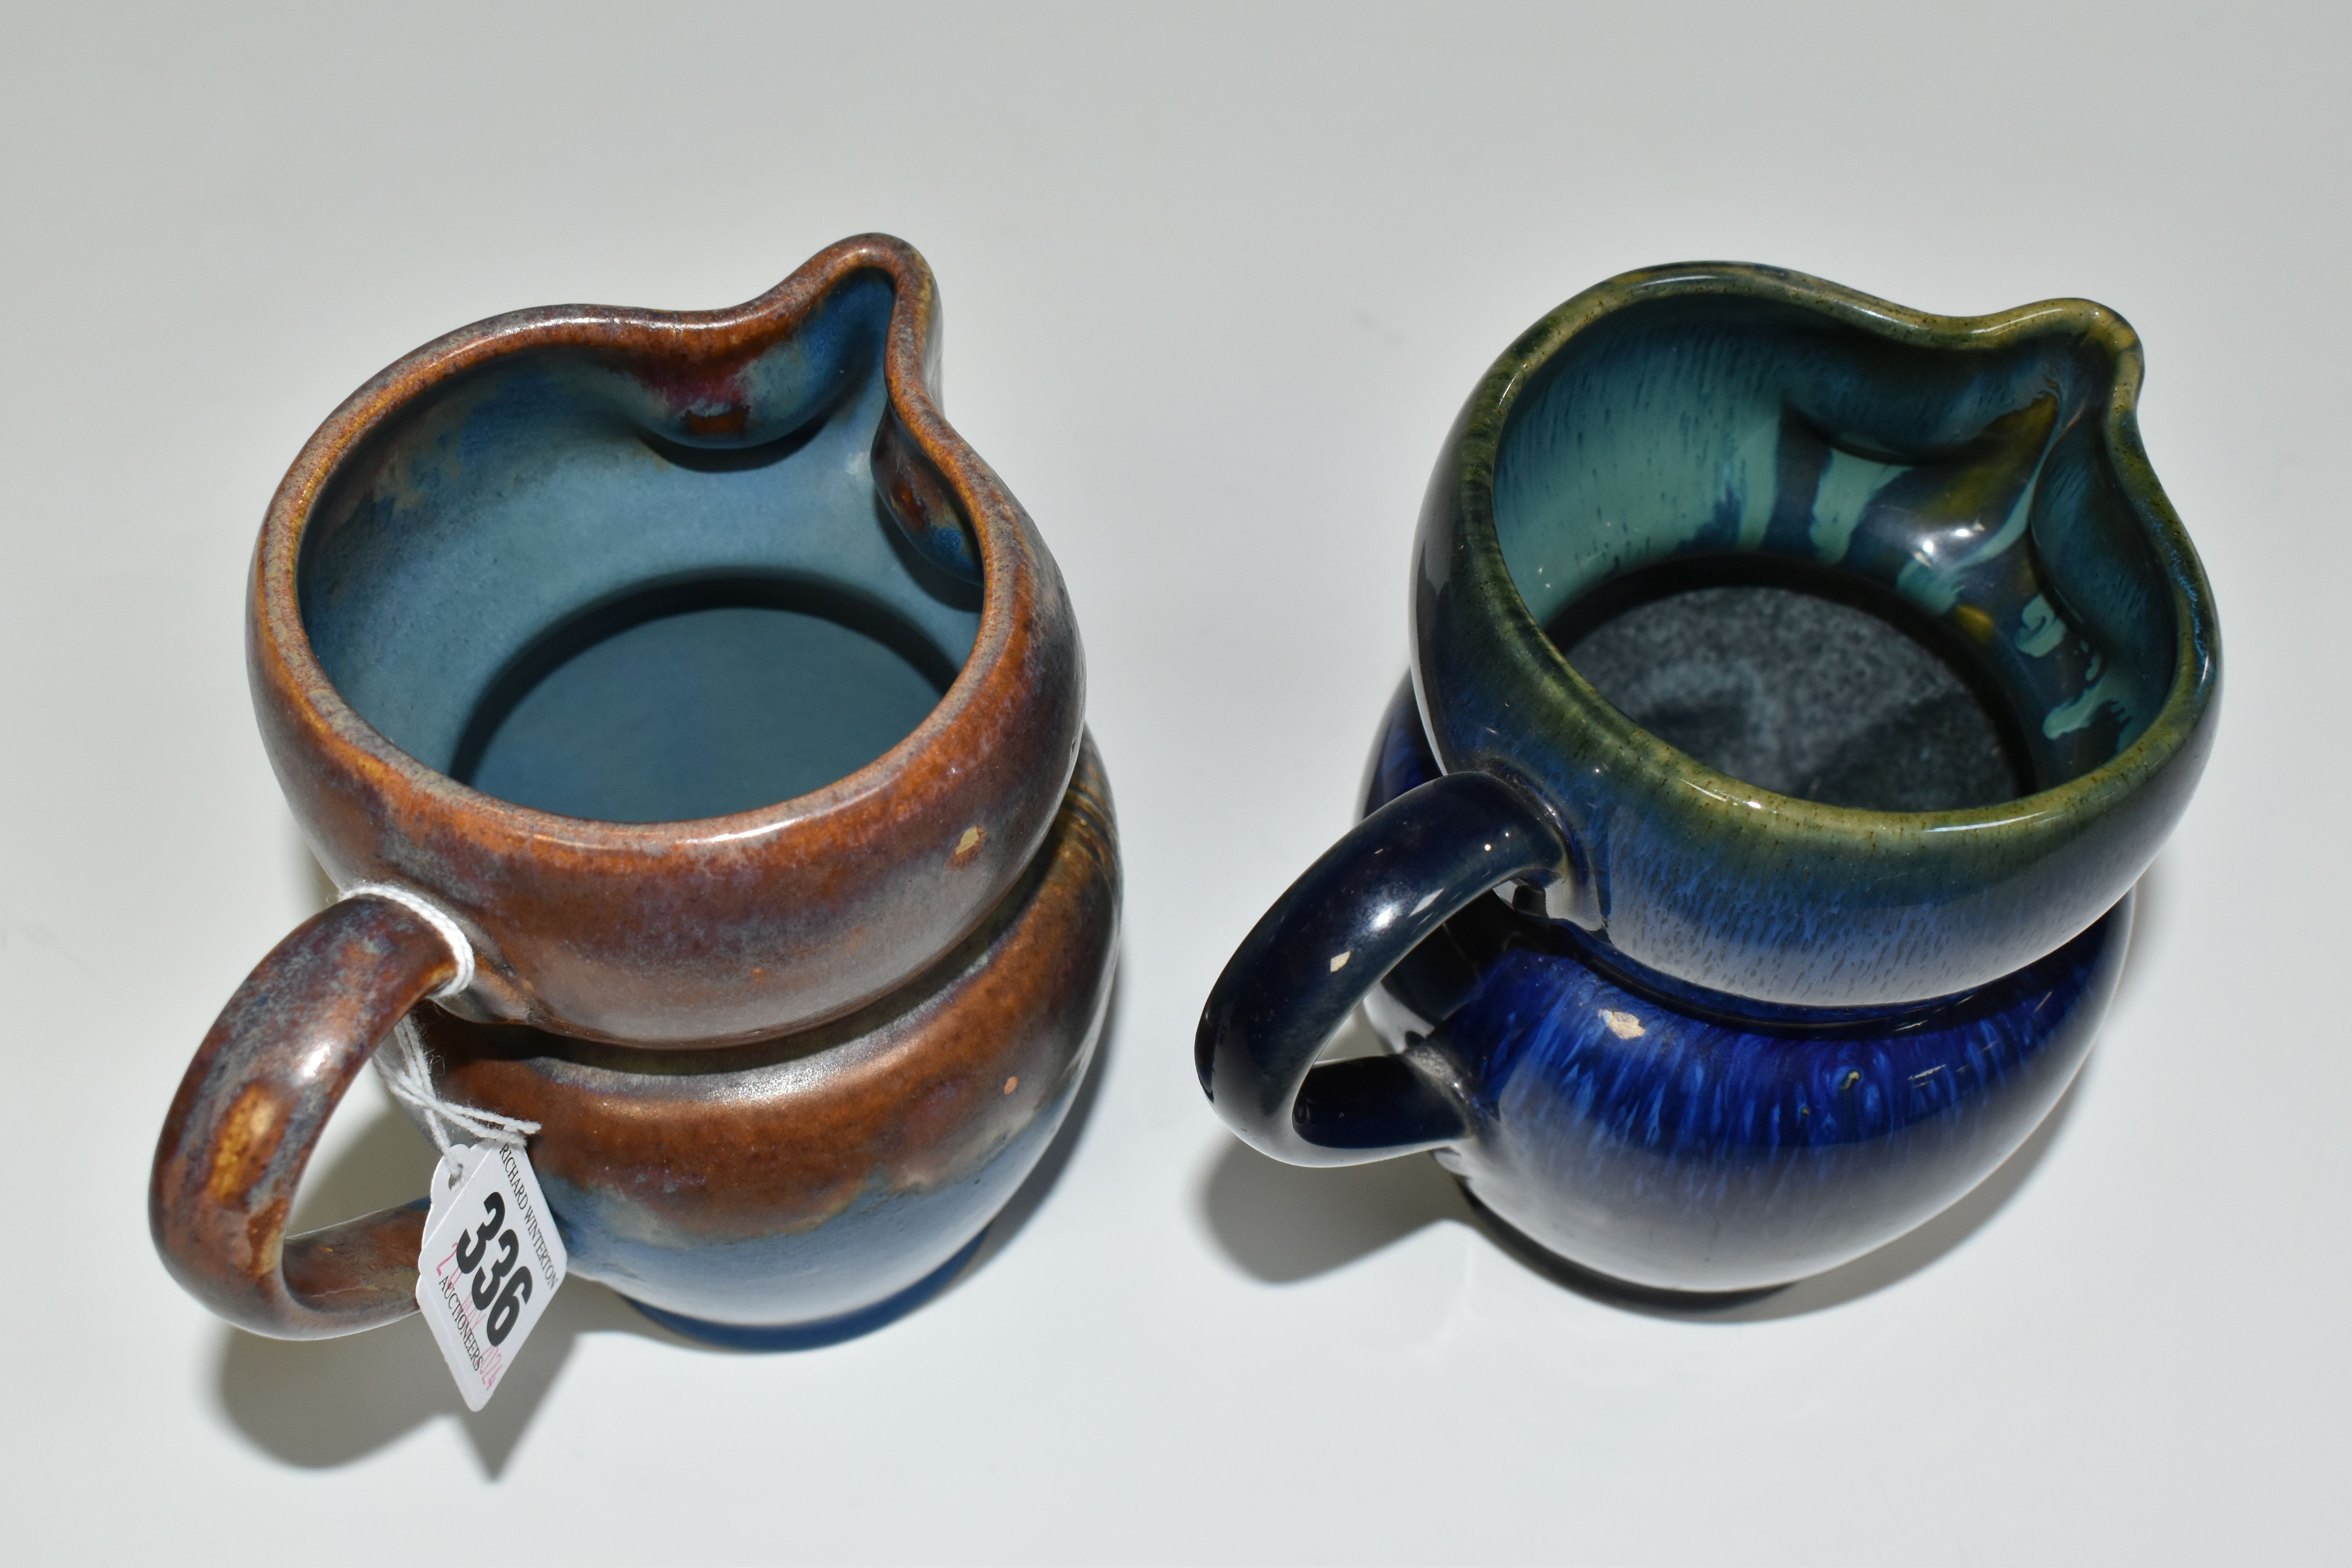 TWO BOURNE DENBY OWL JUGS, 1920s-1930s Danesby Ware, one with mid blue and brown glaze, the other - Image 5 of 6